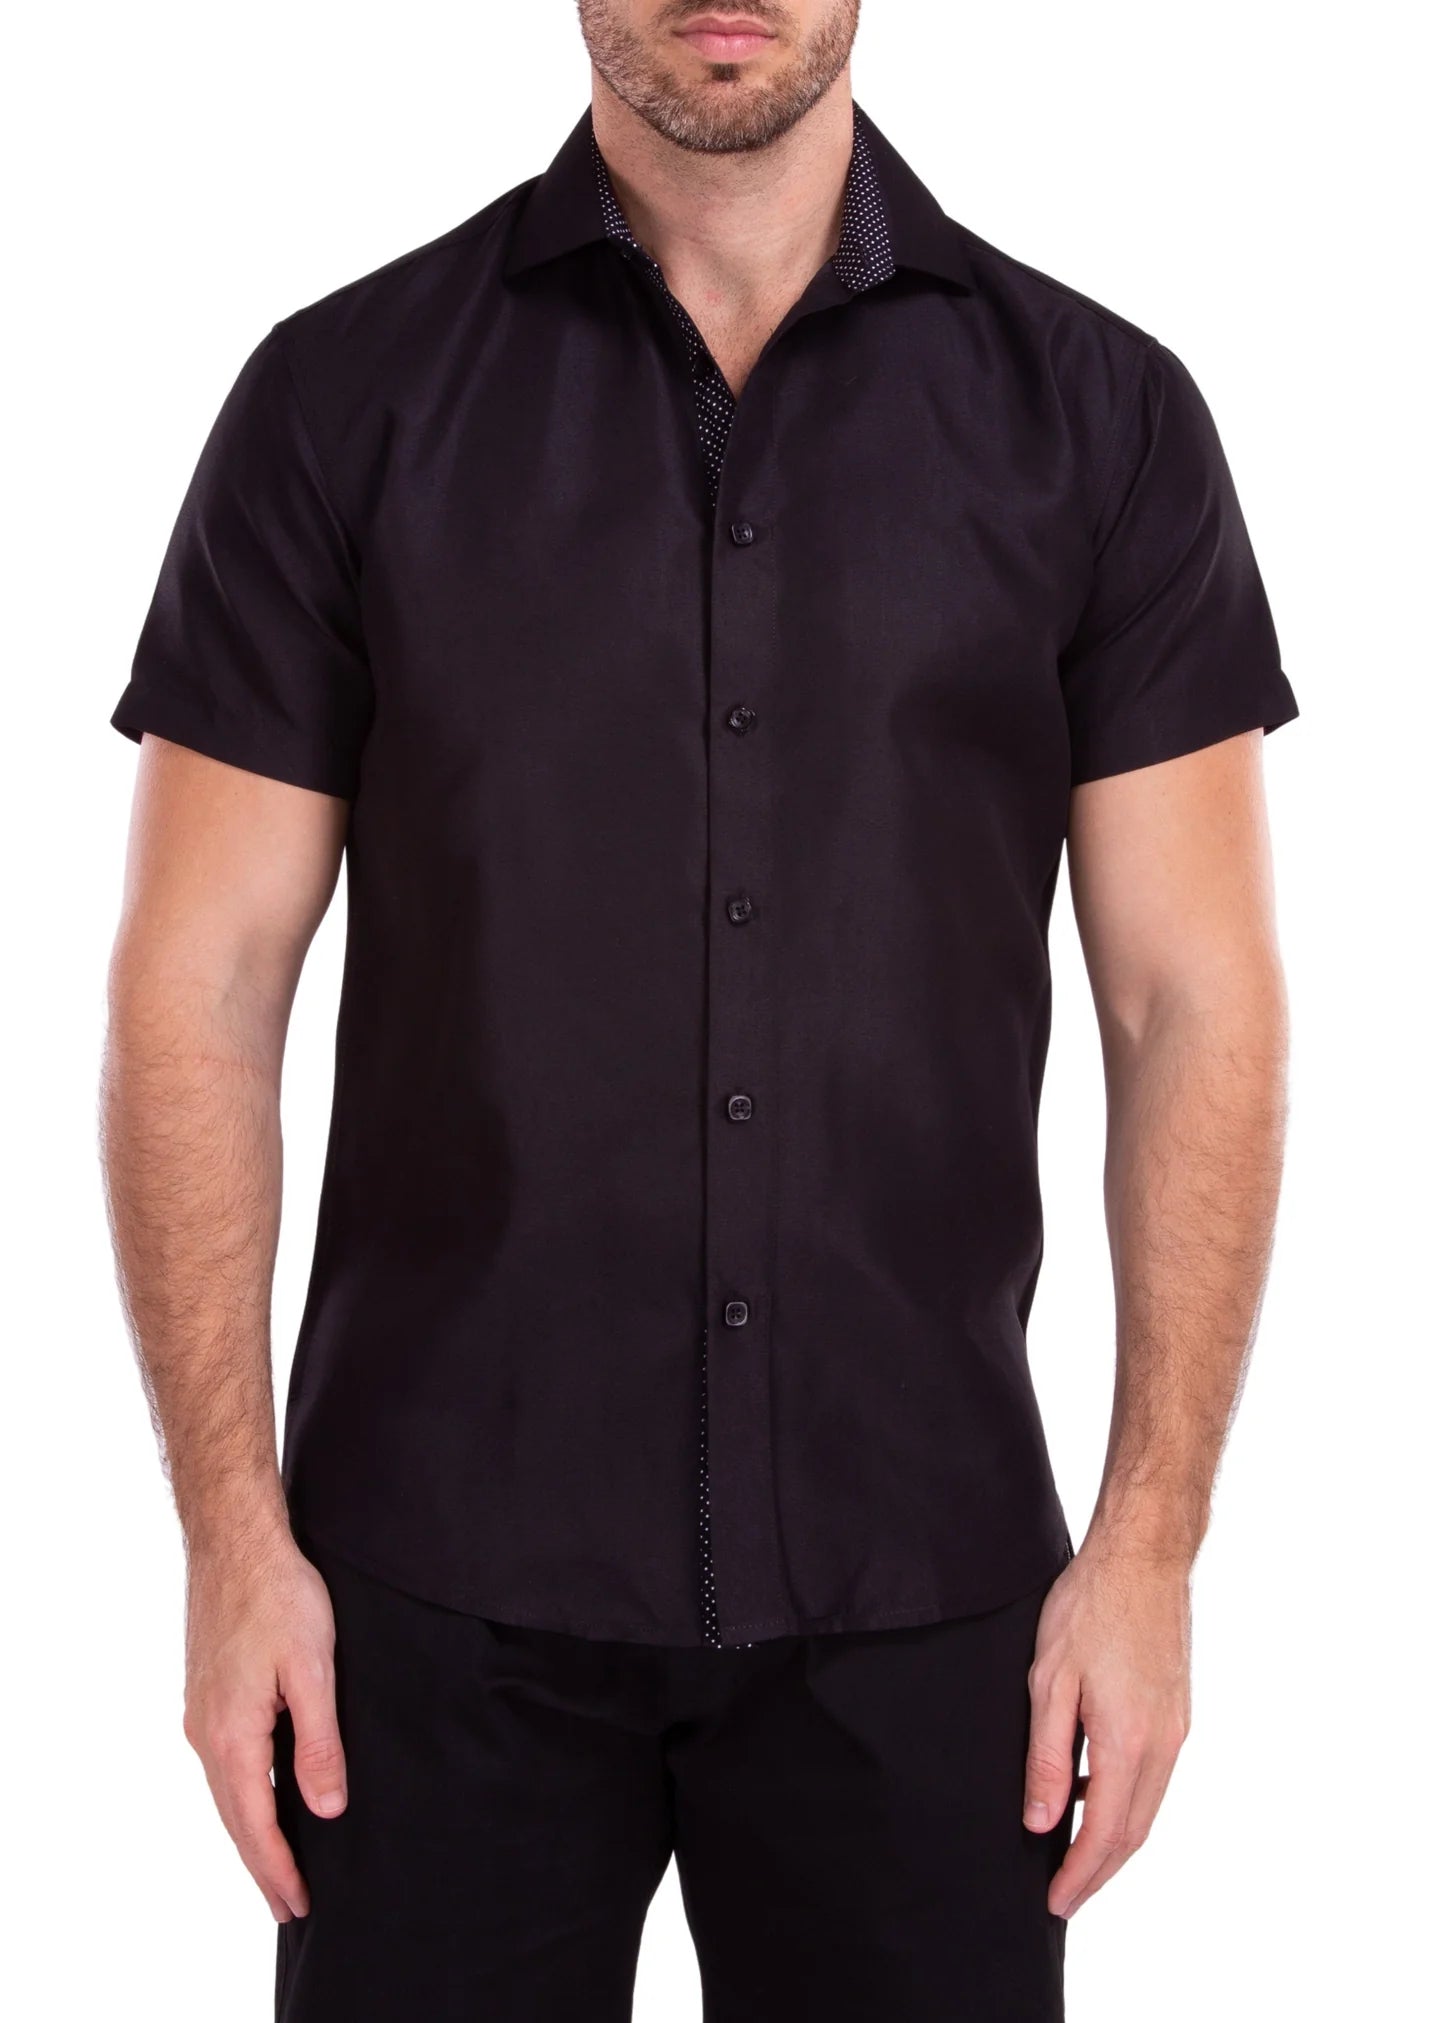 BC Collection Button Down Dress Shirt - Mr. Handsome